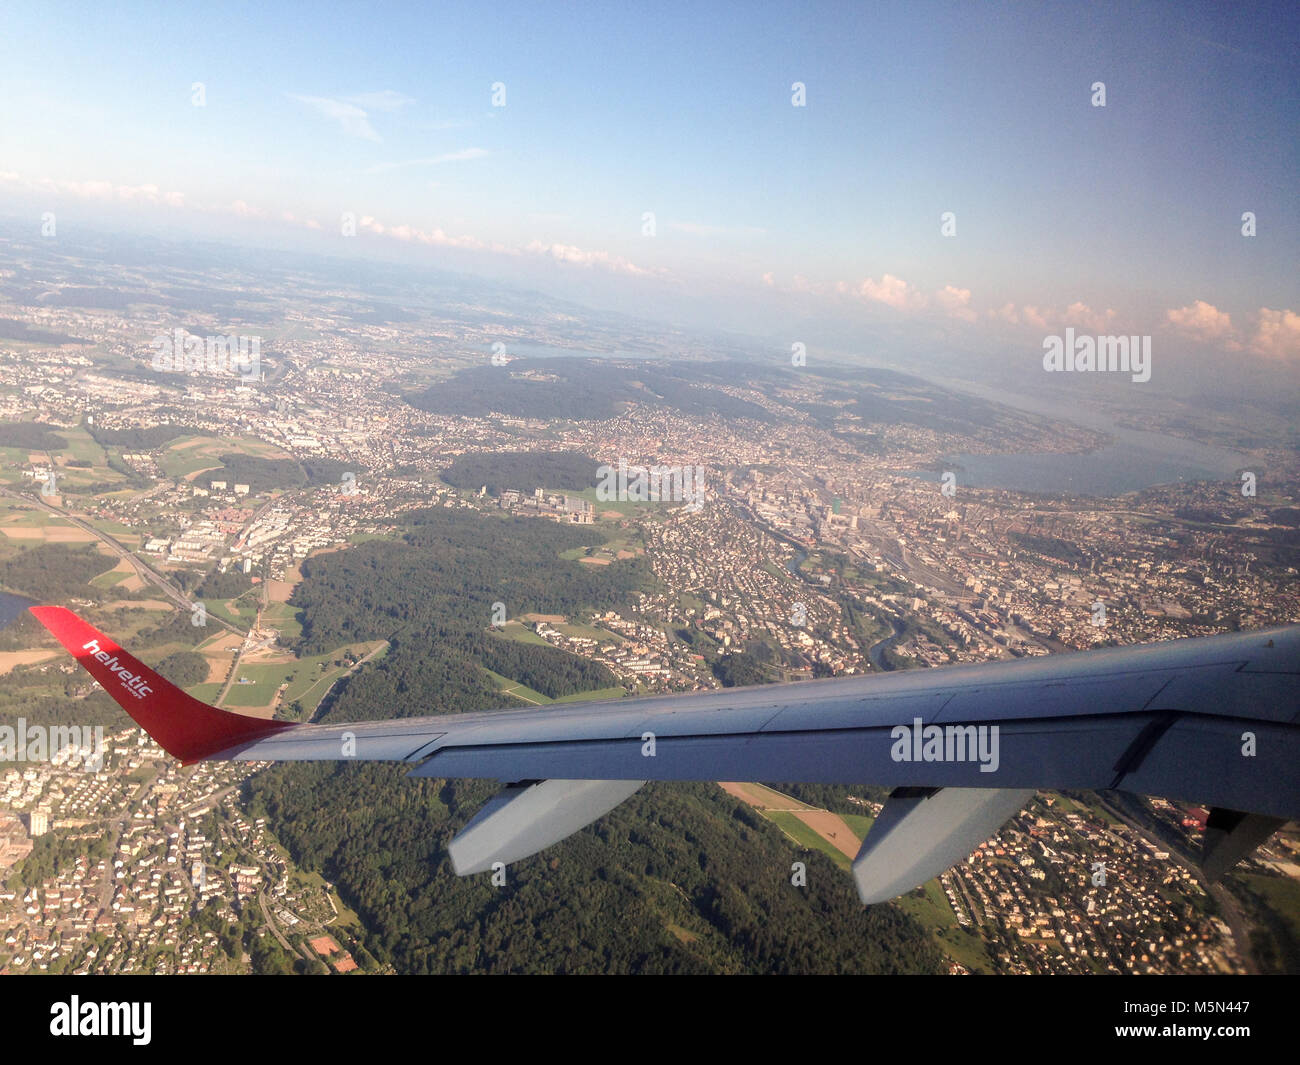 The wing of a Helvetic airways airplane above the city zurich in Switzerland Stock Photo